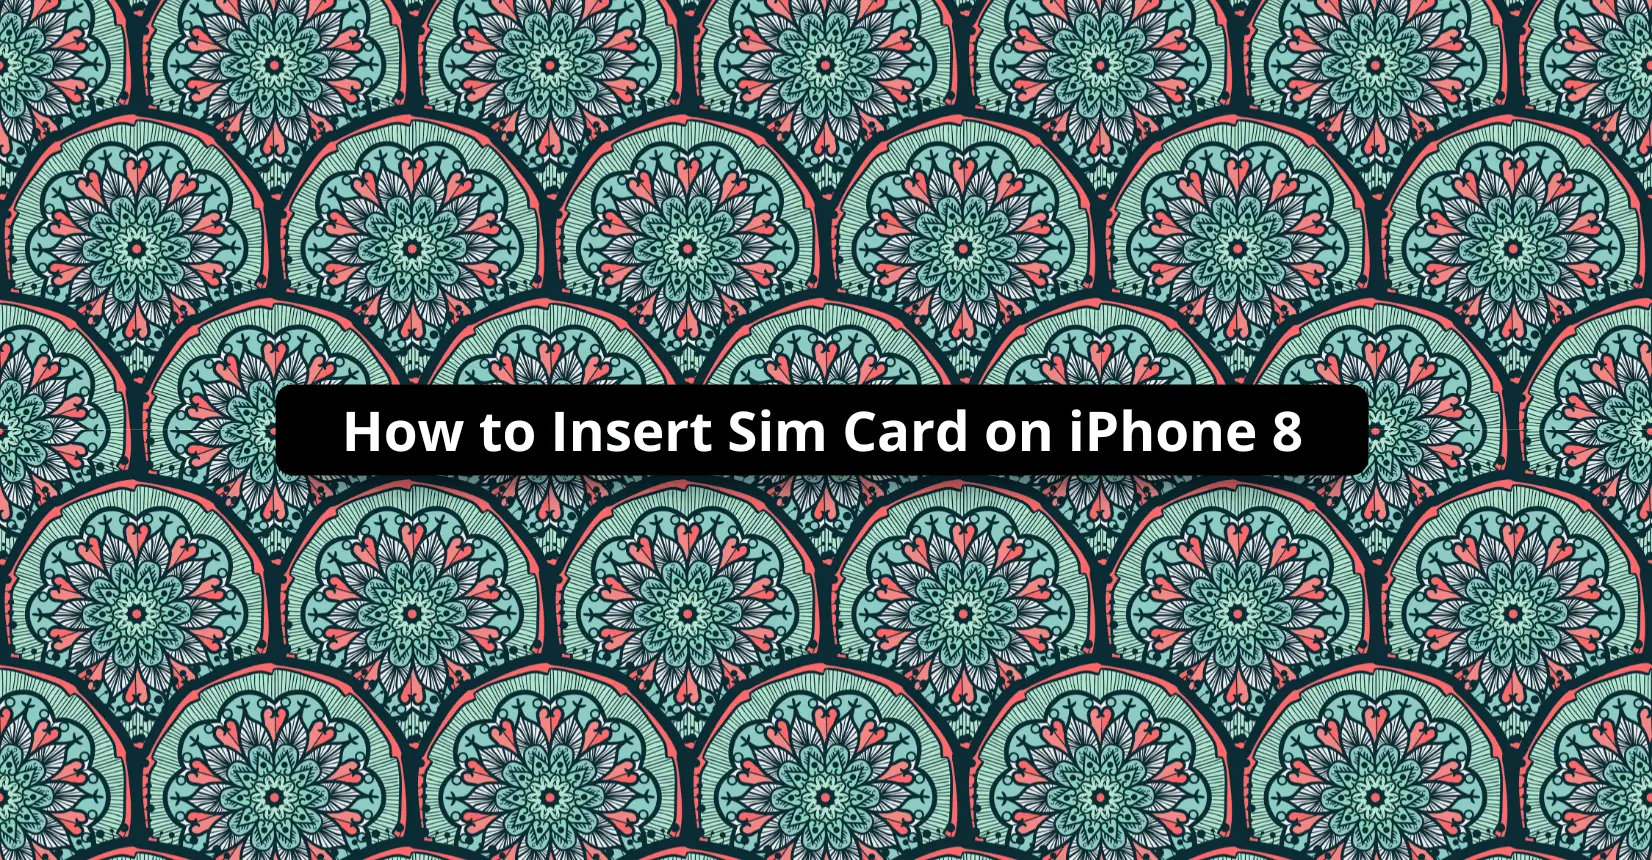 How to Insert Sim Card on iPhone 8